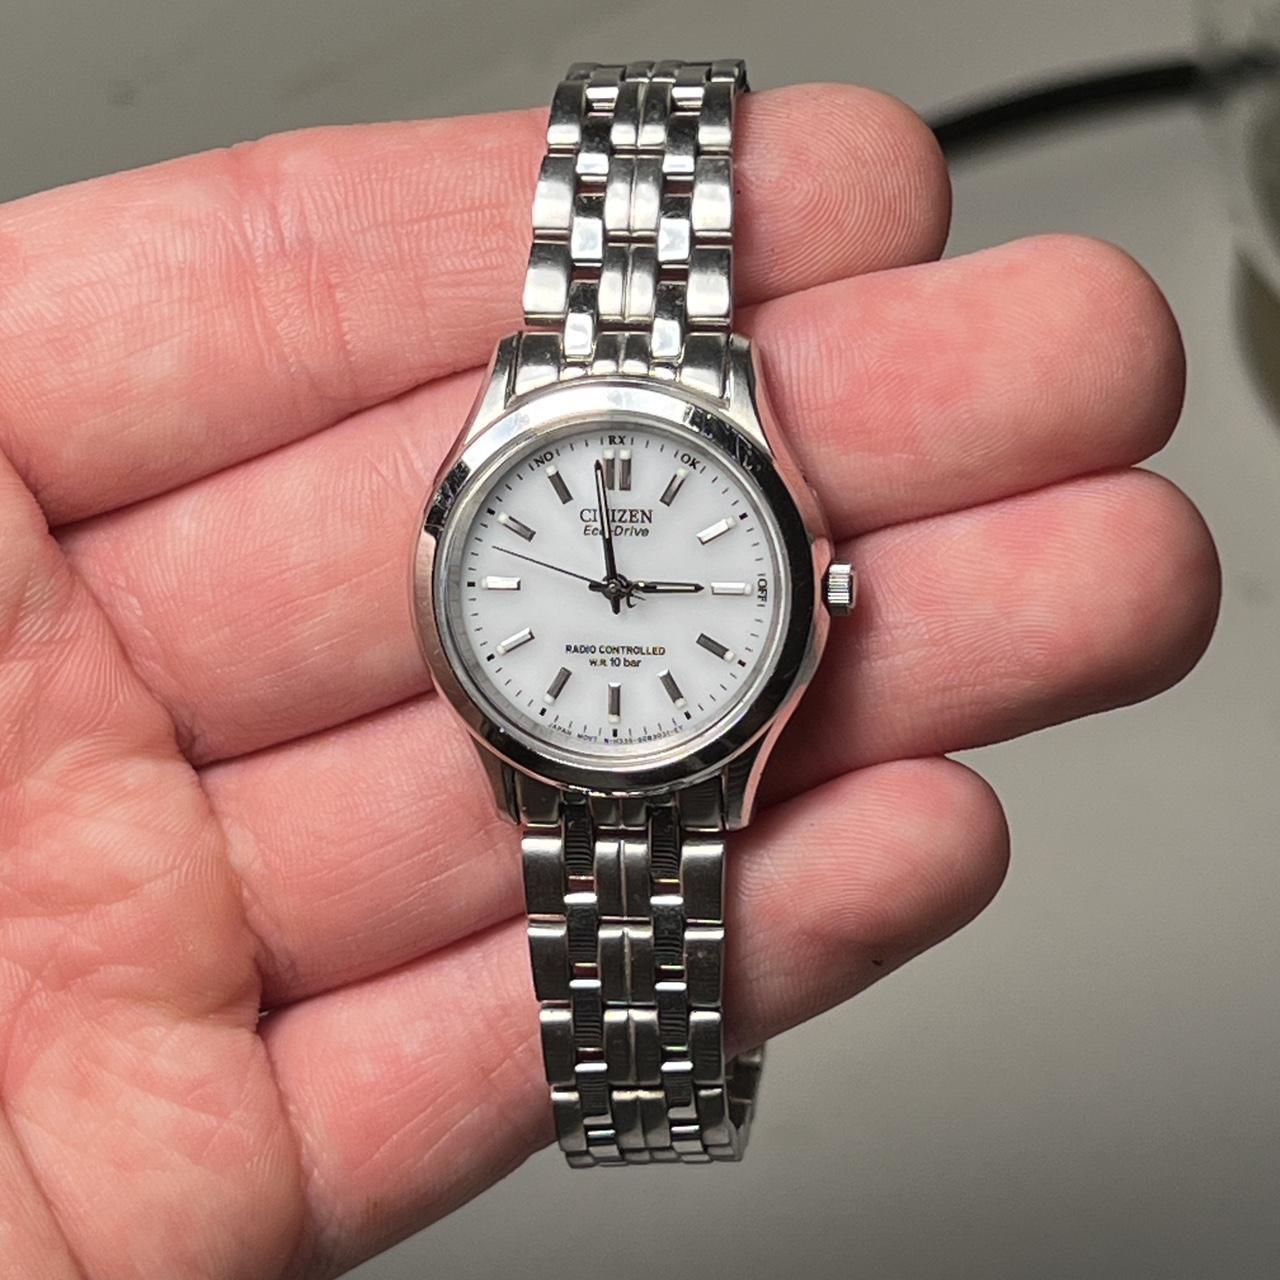 Citizen Women's Silver and White Watch